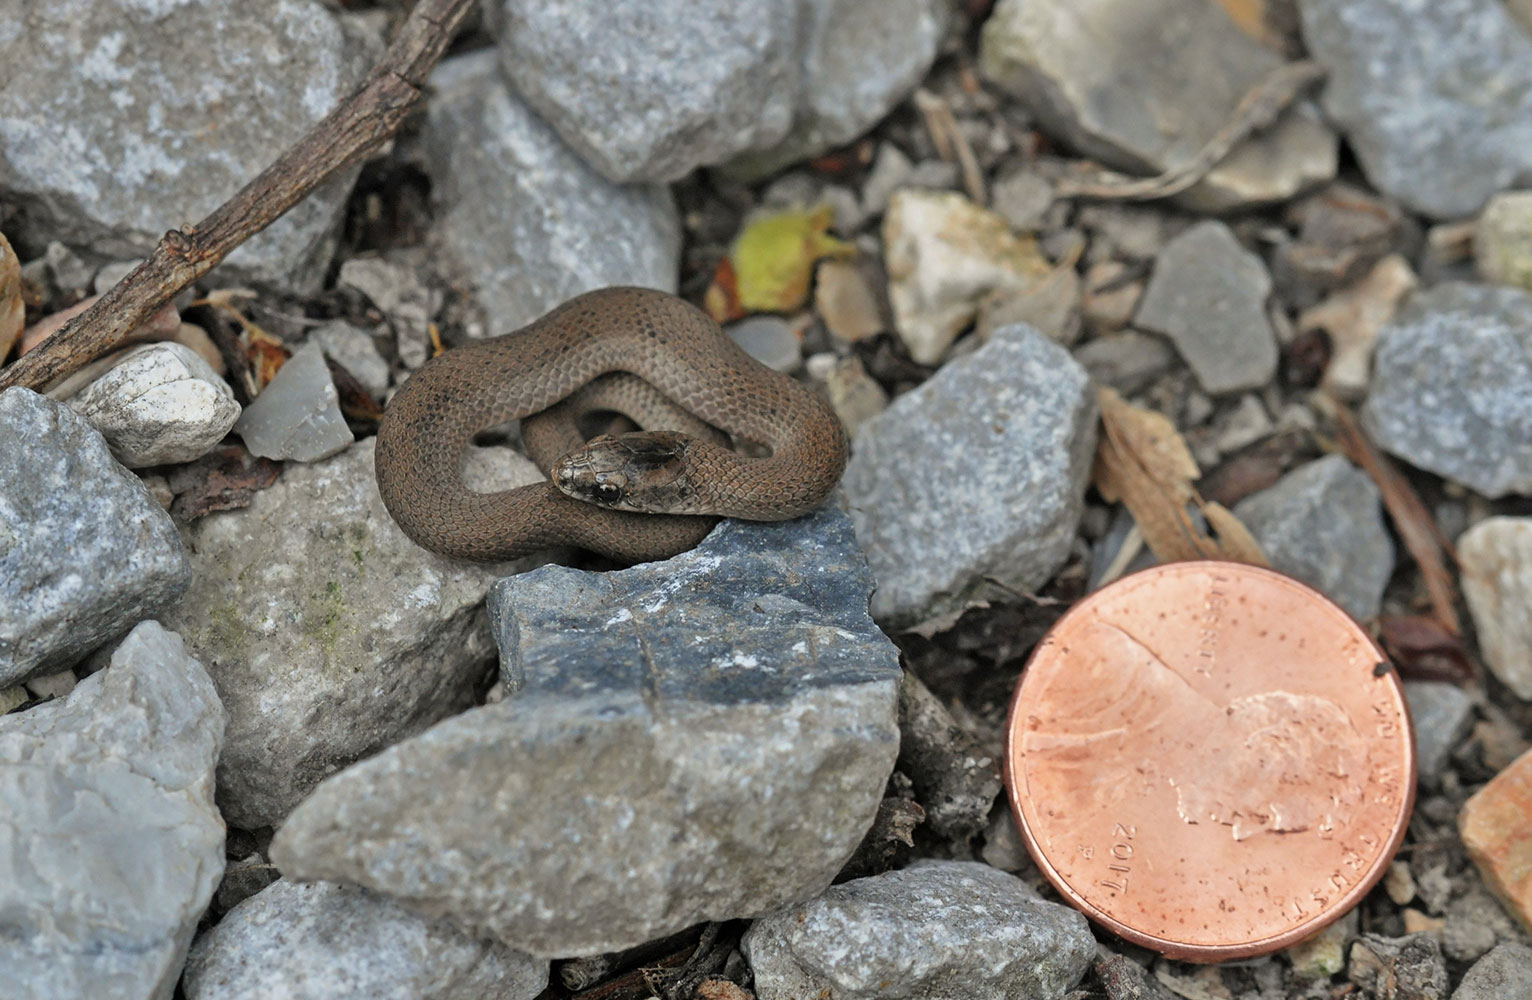 A coiled smooth earth snake sits on a bed of rocks alongside a penny - that is bigger than the snake!